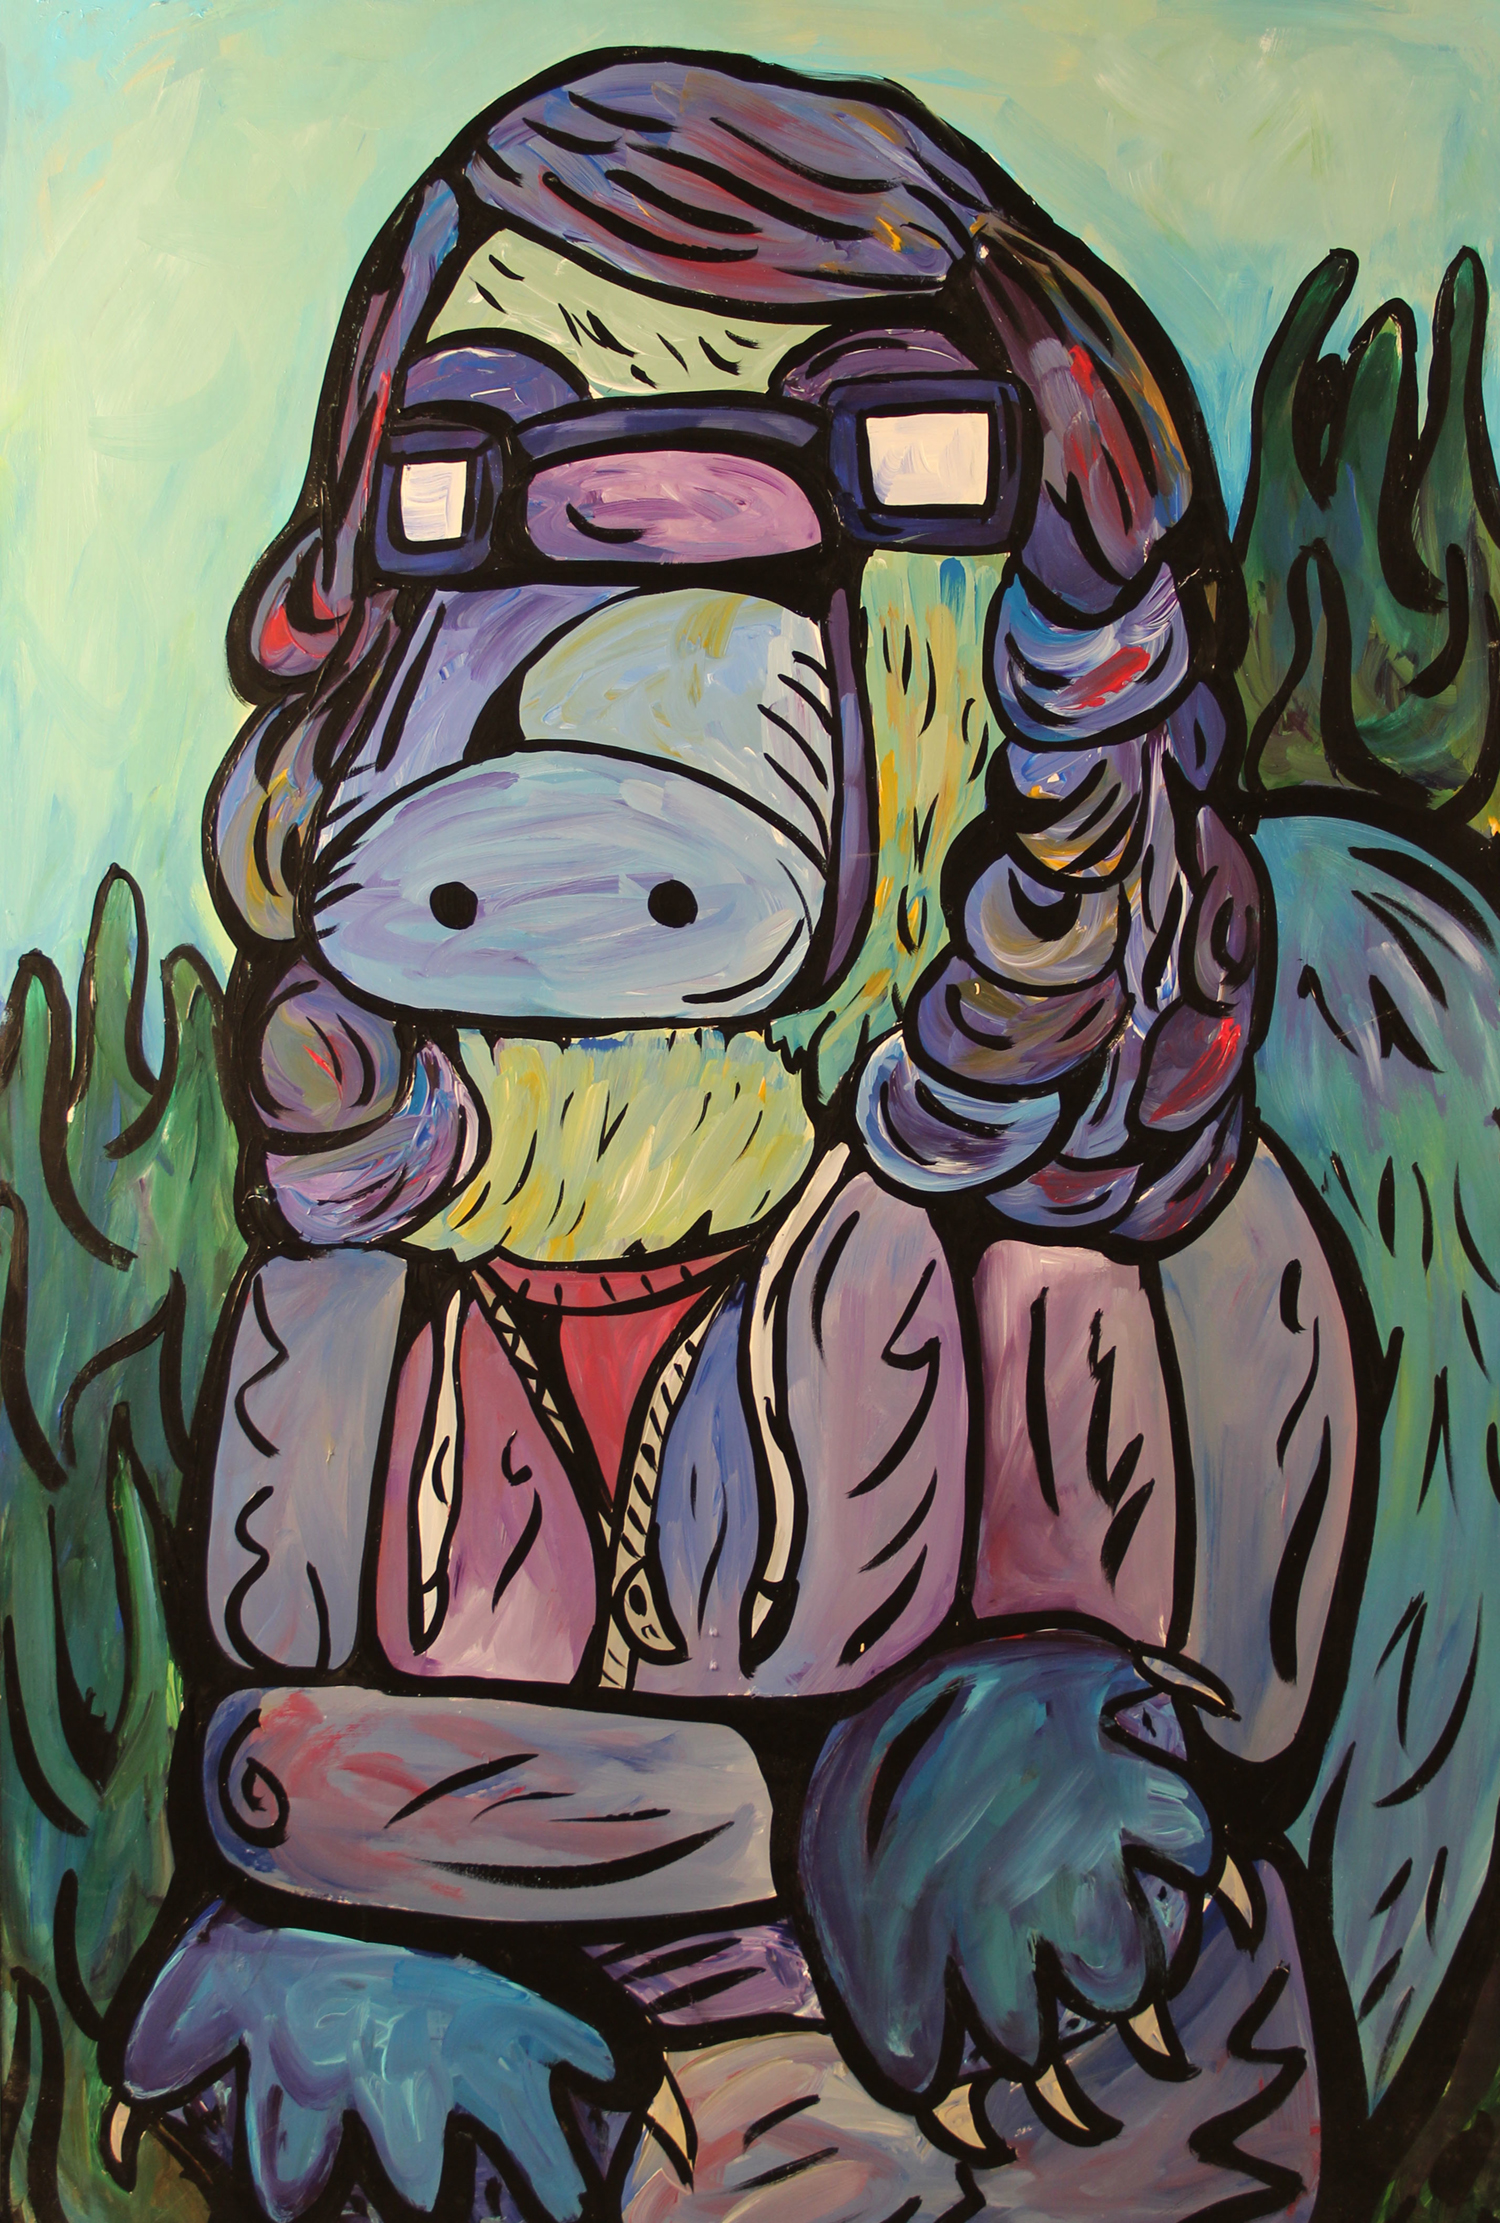 A colorful, abstract painting of an animal in a wig and coat. Image by Courtney Huston